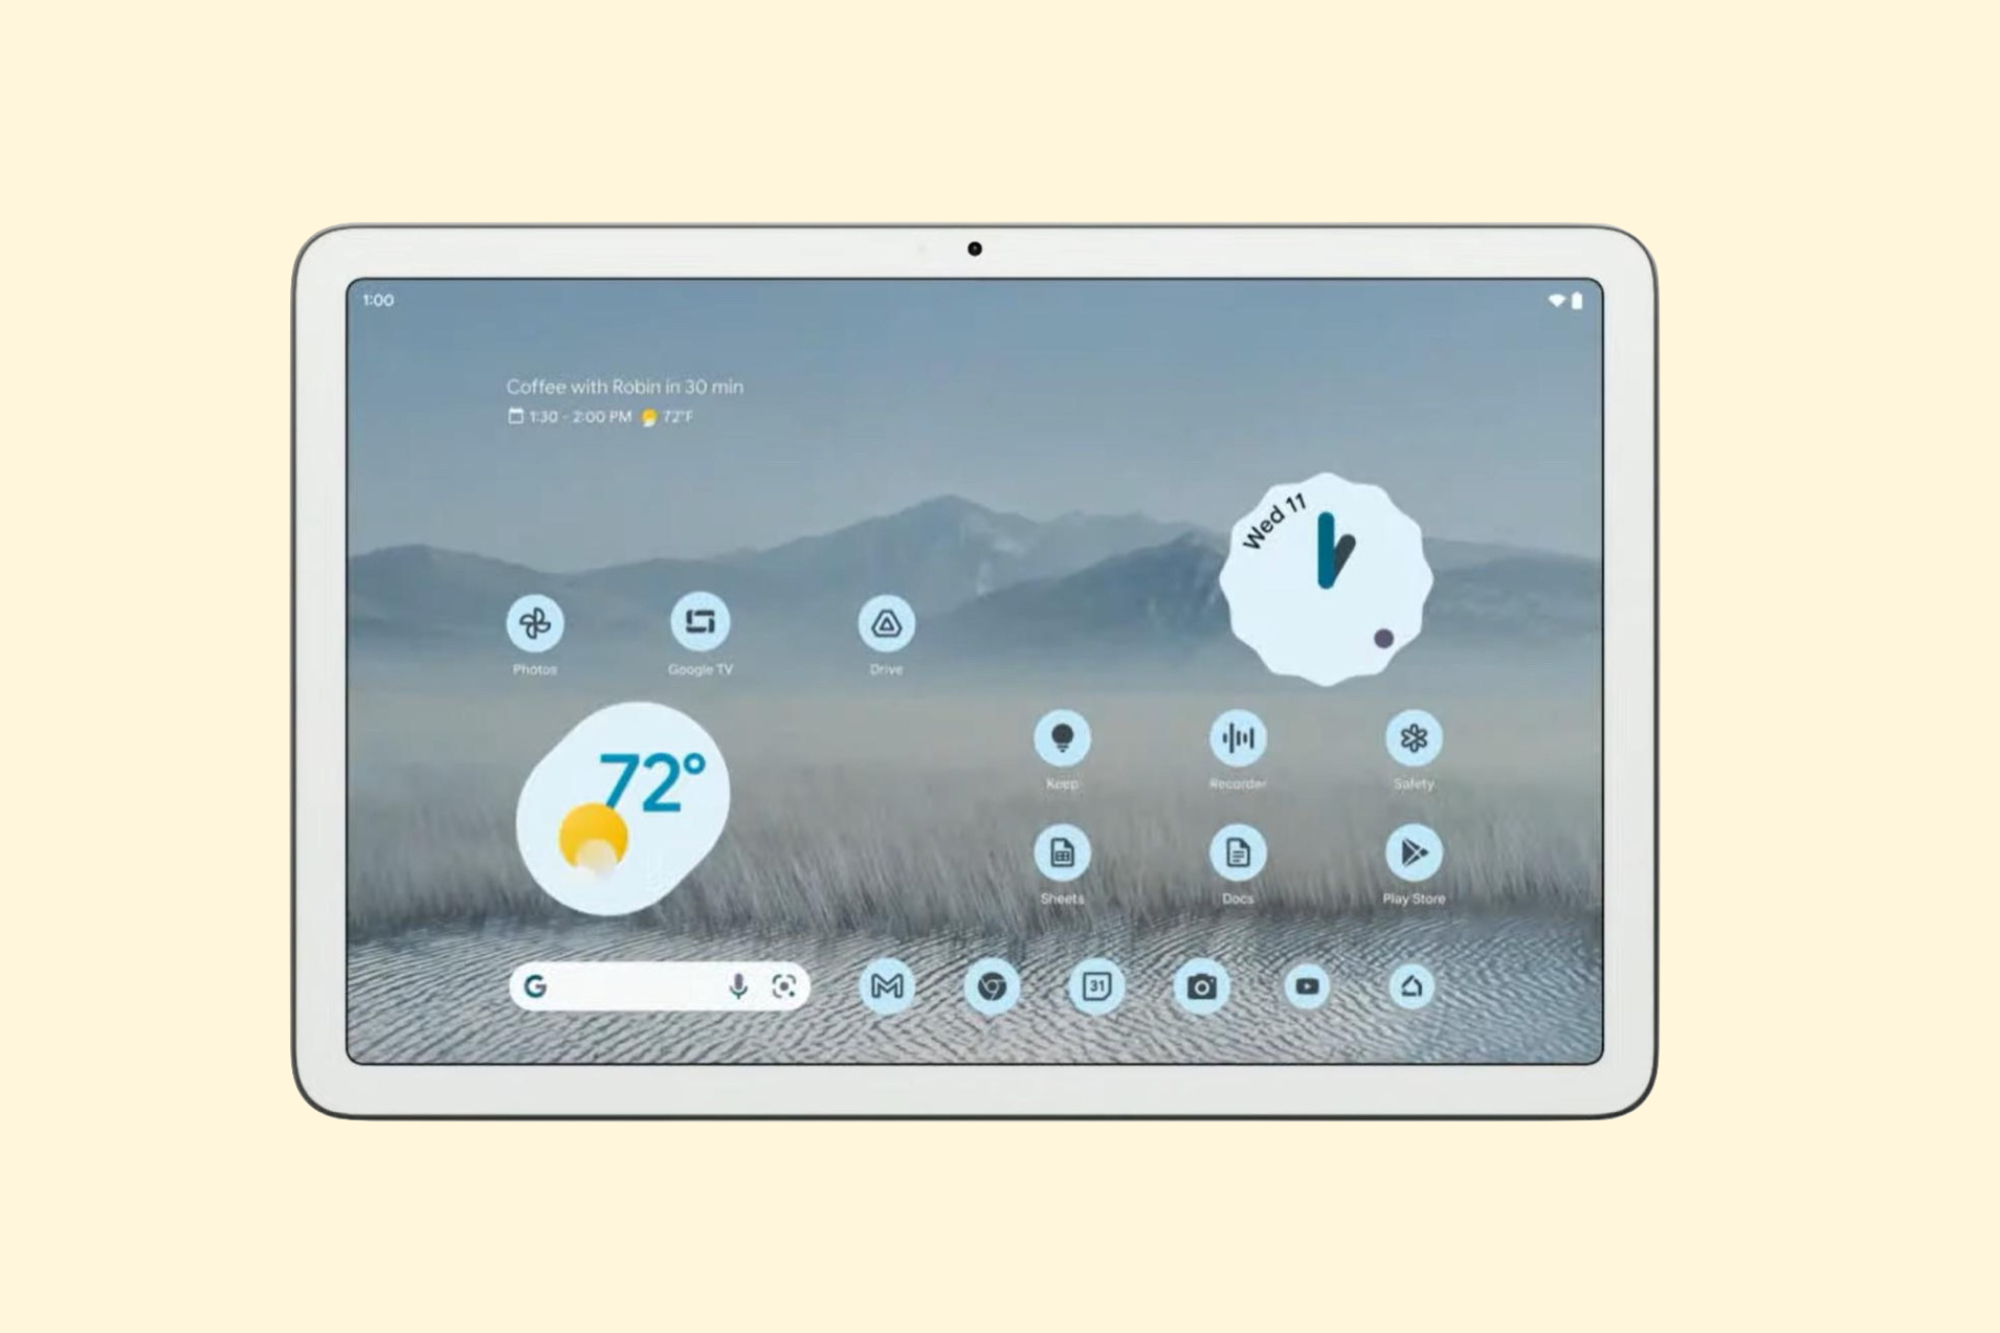 upgrades to Android 11 for its Fire tablets - 9to5Google